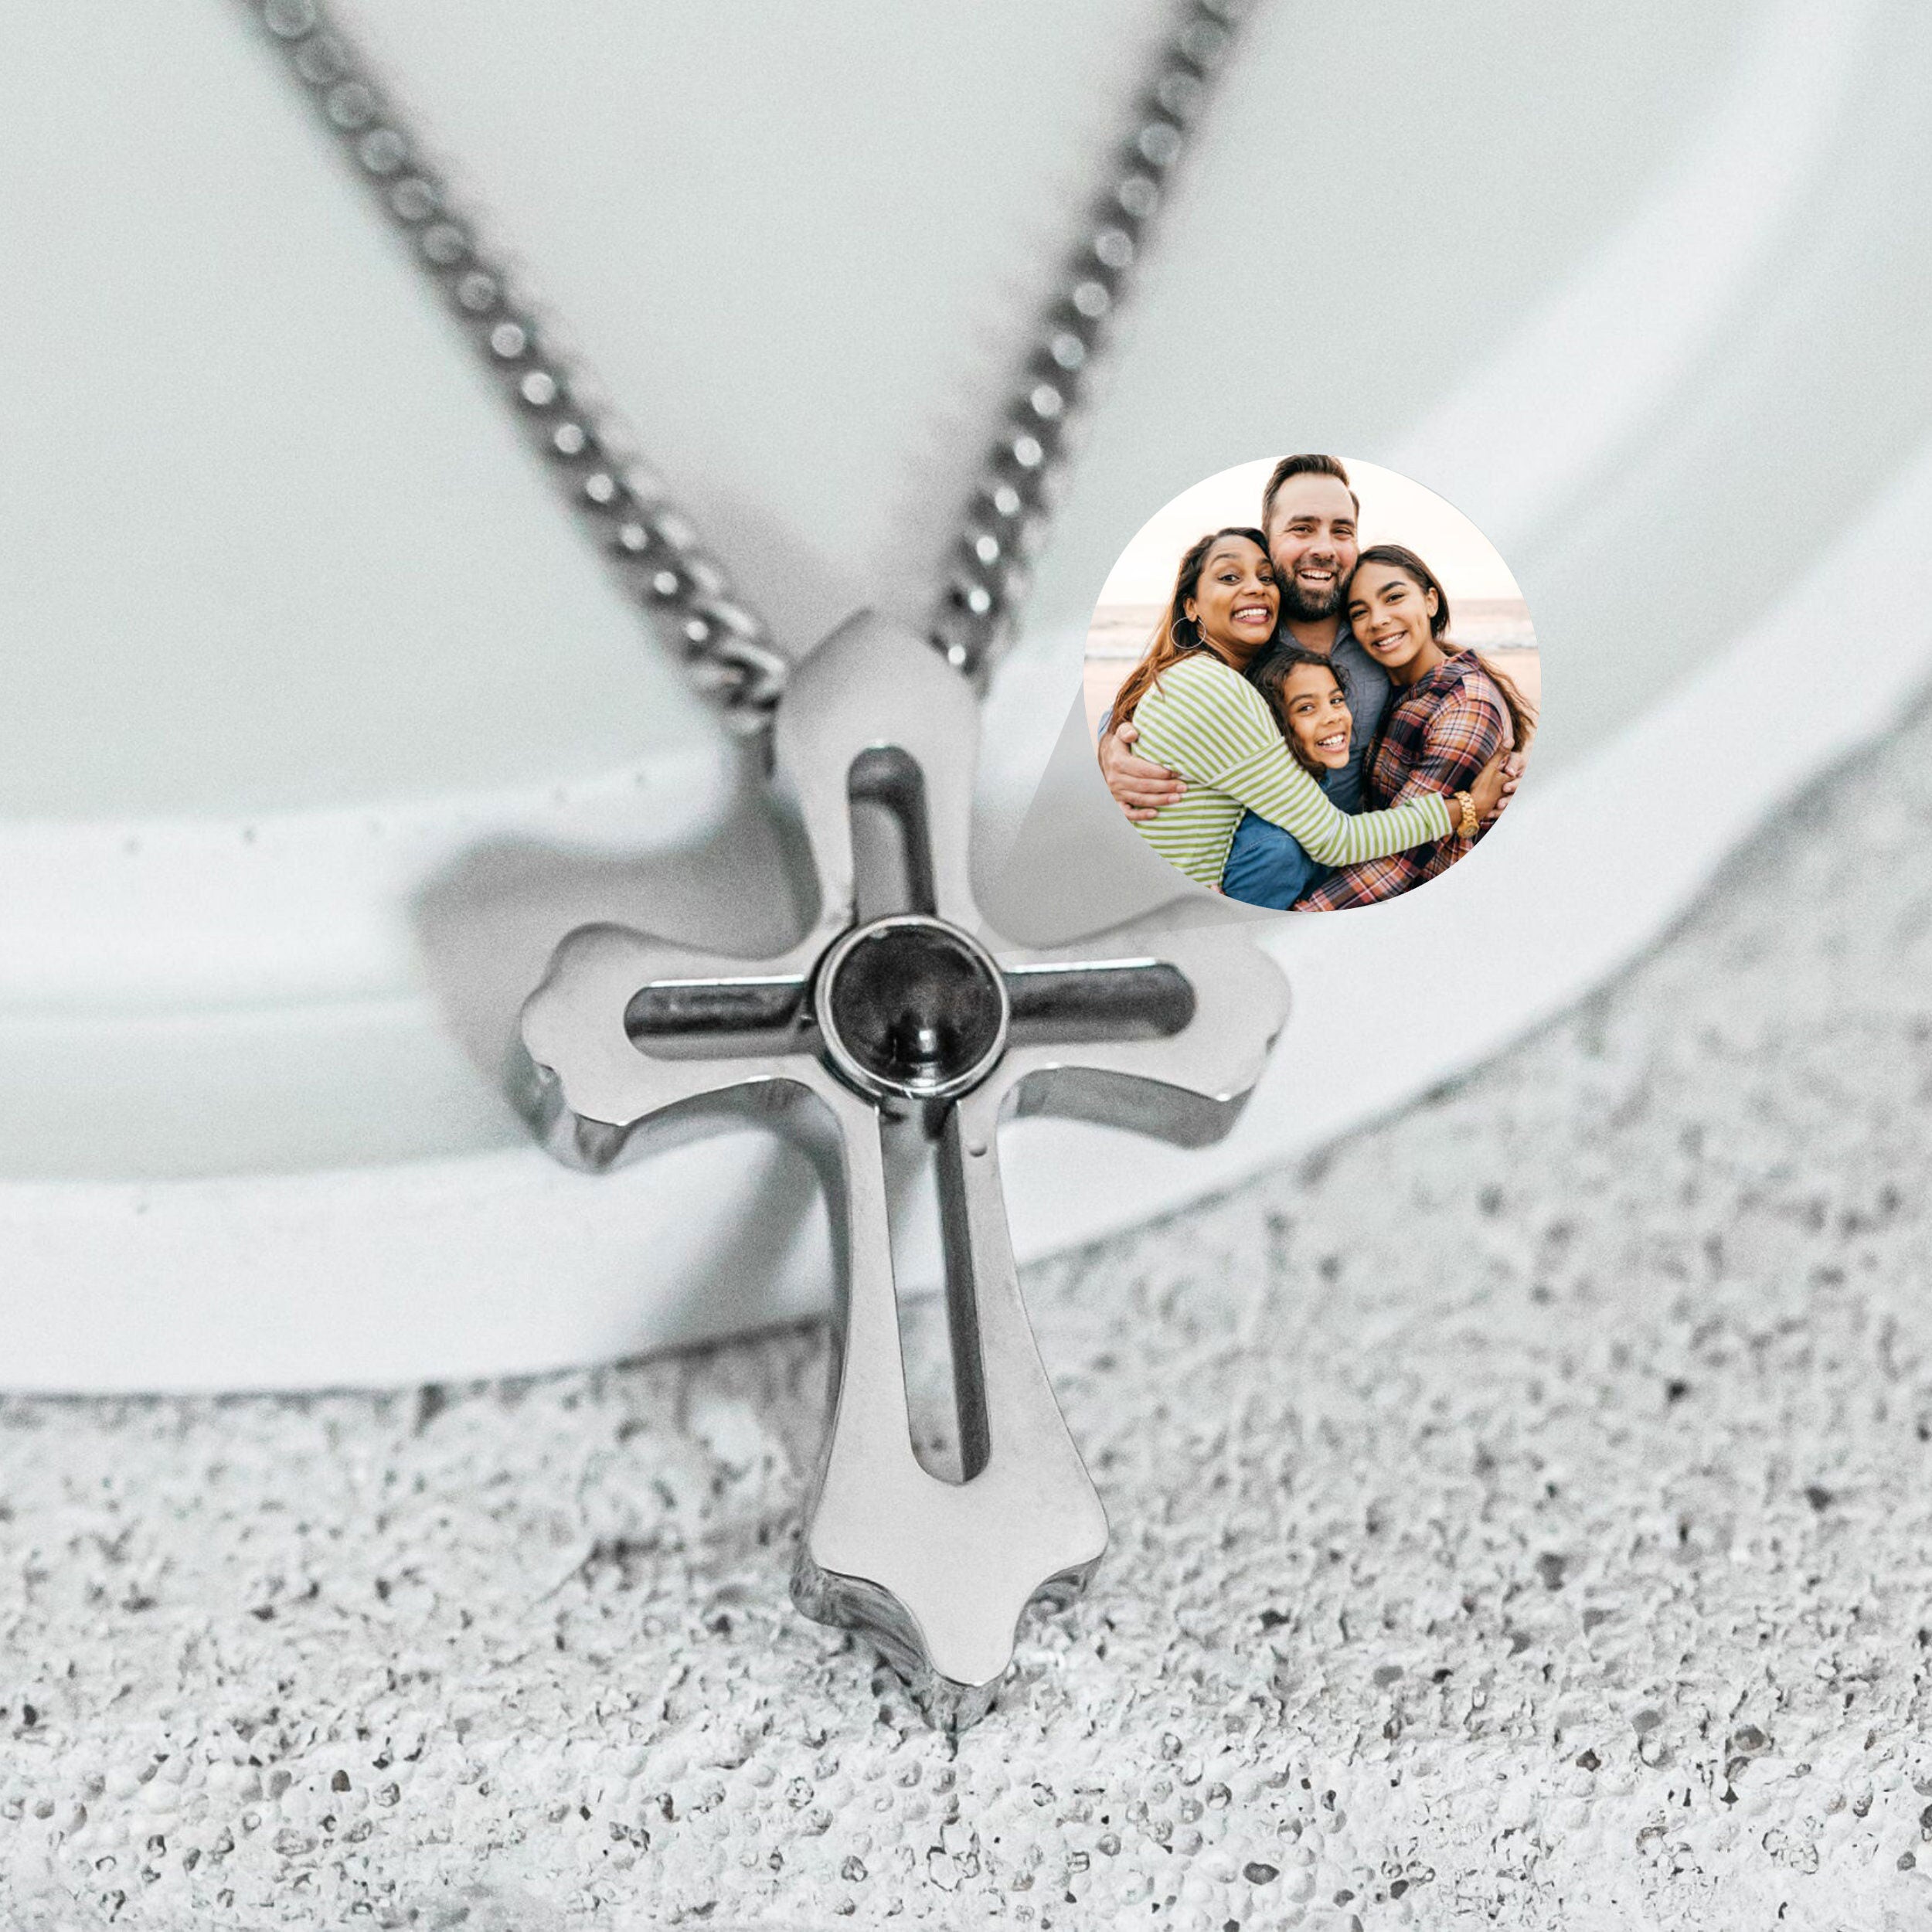 Custom Photo Projection Necklace Personalized Cross Jewelry